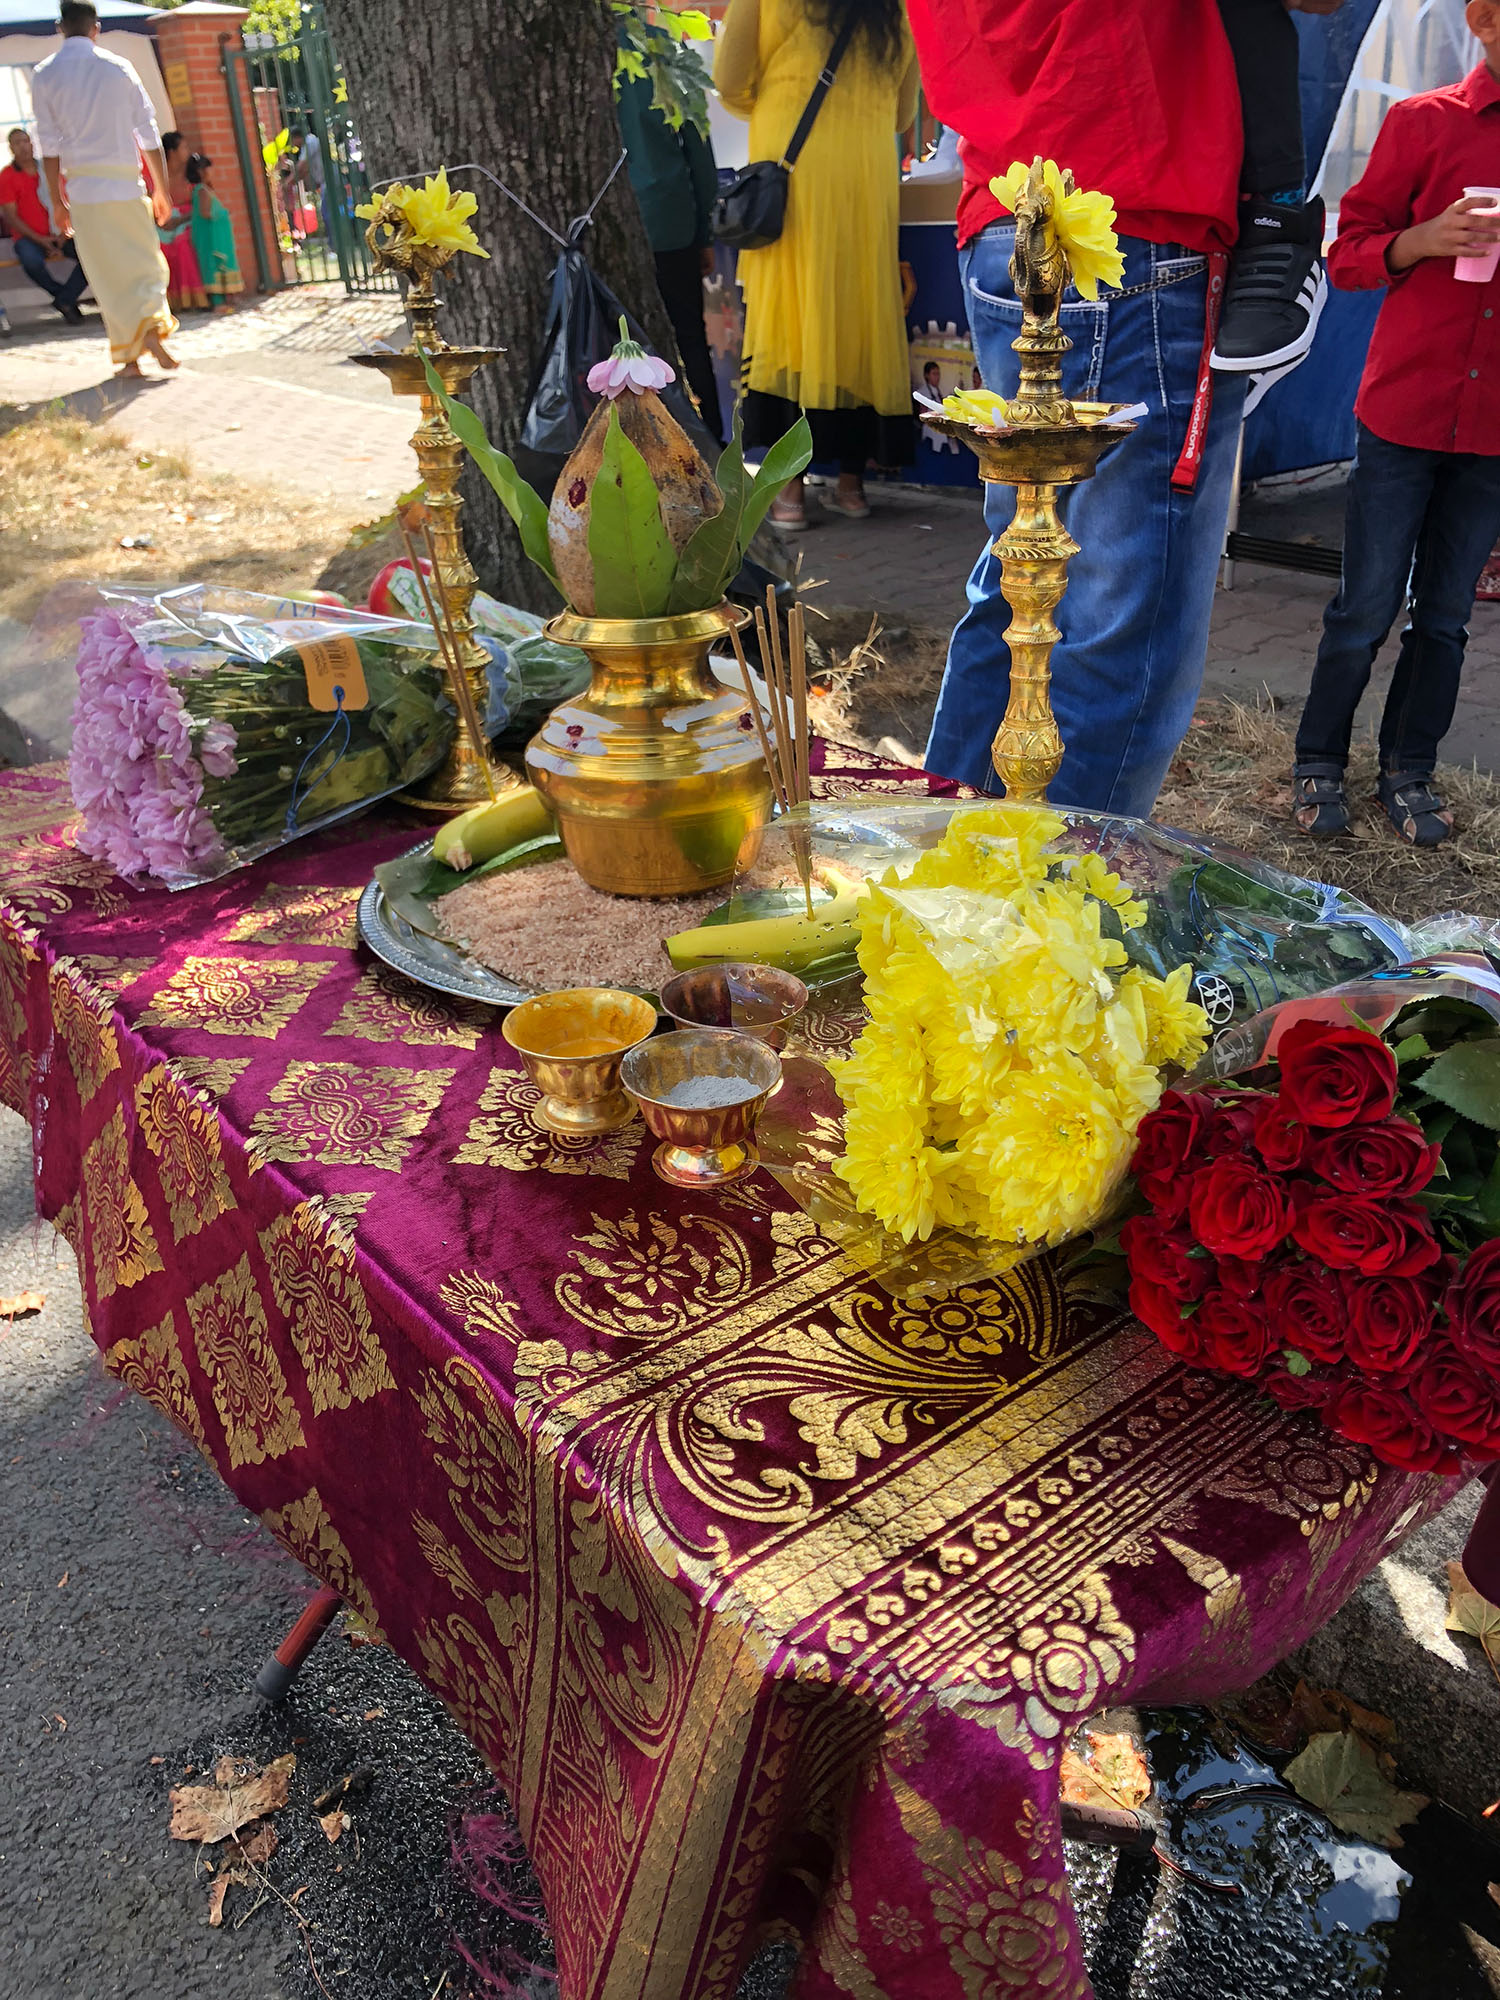 A table with a purple and gold decorated tablecloth. On the table are tall lamps filled with oil on either side, which are lit before making special offerings to God. In the center is a vessel filled with water that is sprinkled in homes after special services as a sign of holiness. The top of the vessel is covered with coconut and mango leaves.